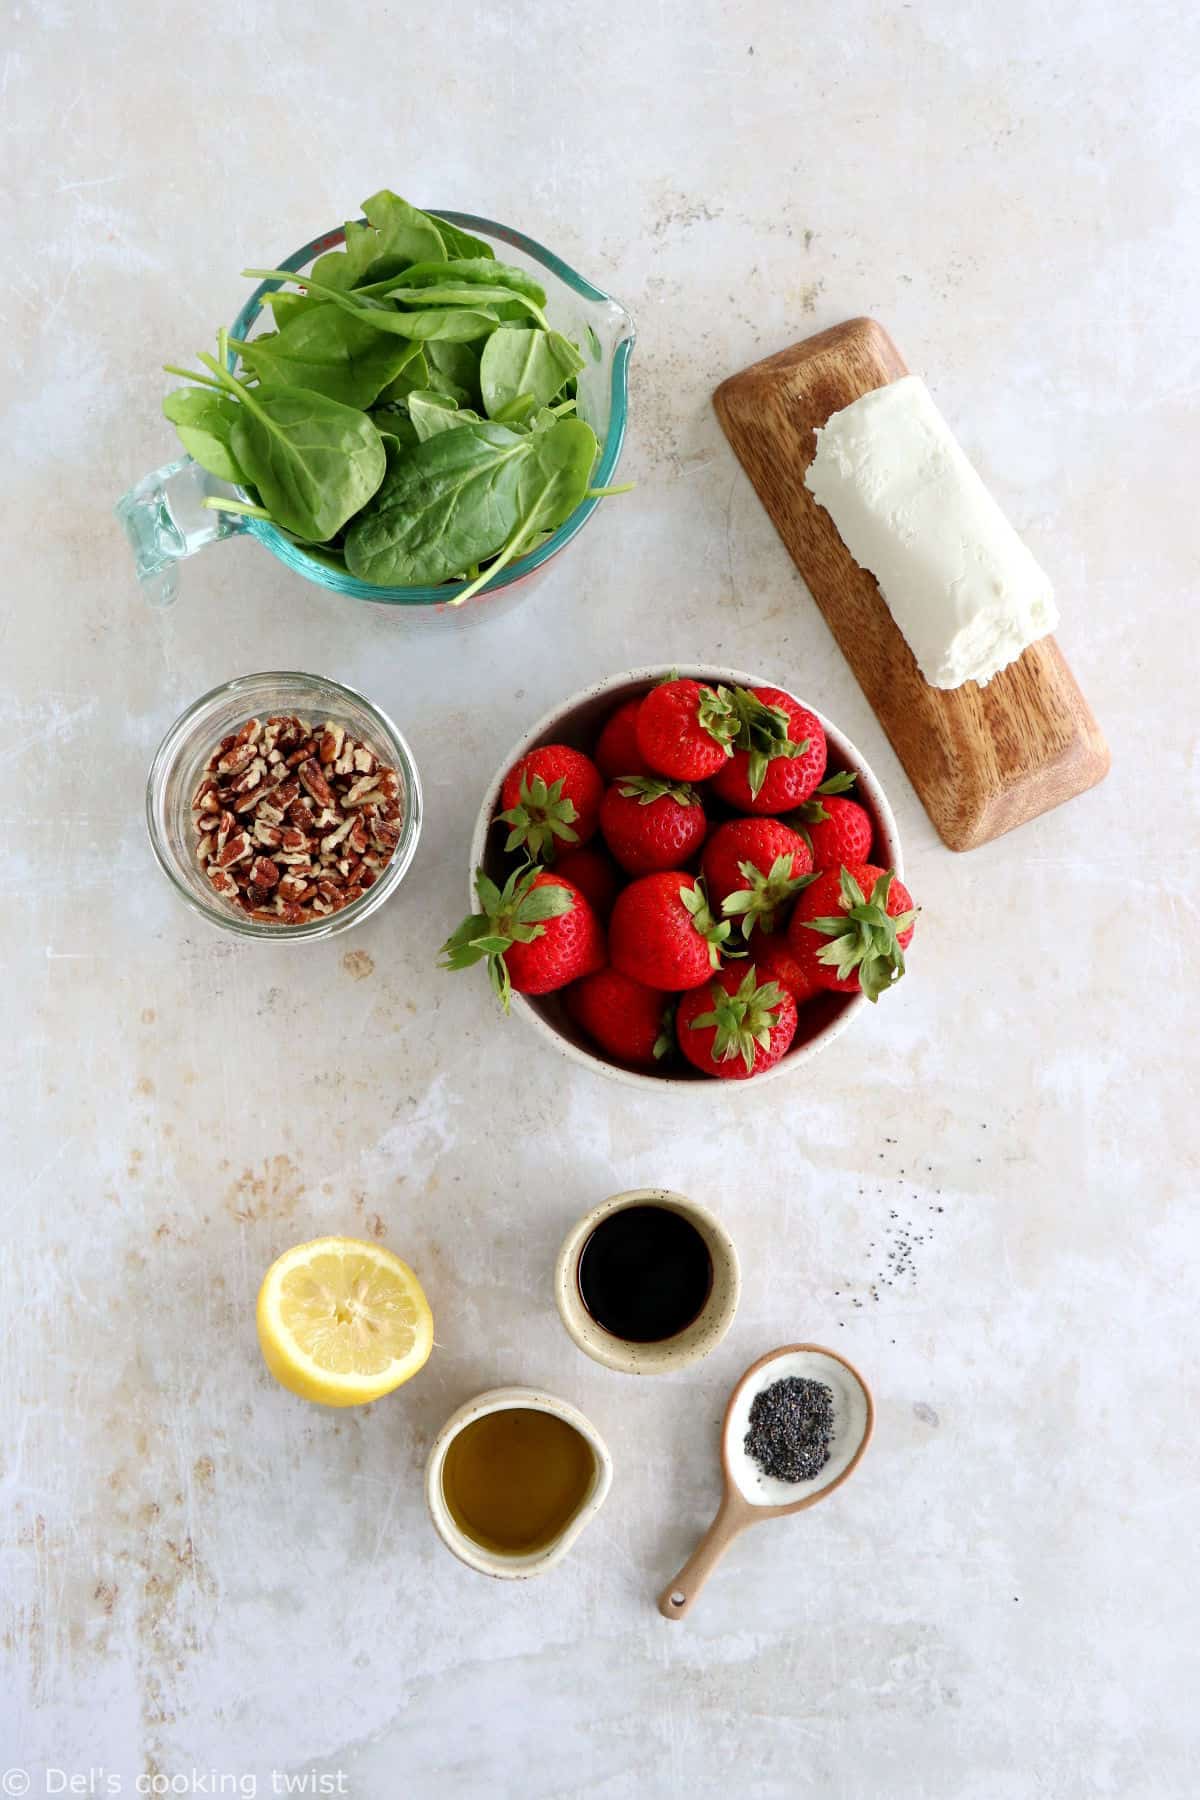 This strawberry spinach salad with goat cheese is tossed in a flavorful balsamic poppy seed dressing. A simple summer salad recipe!